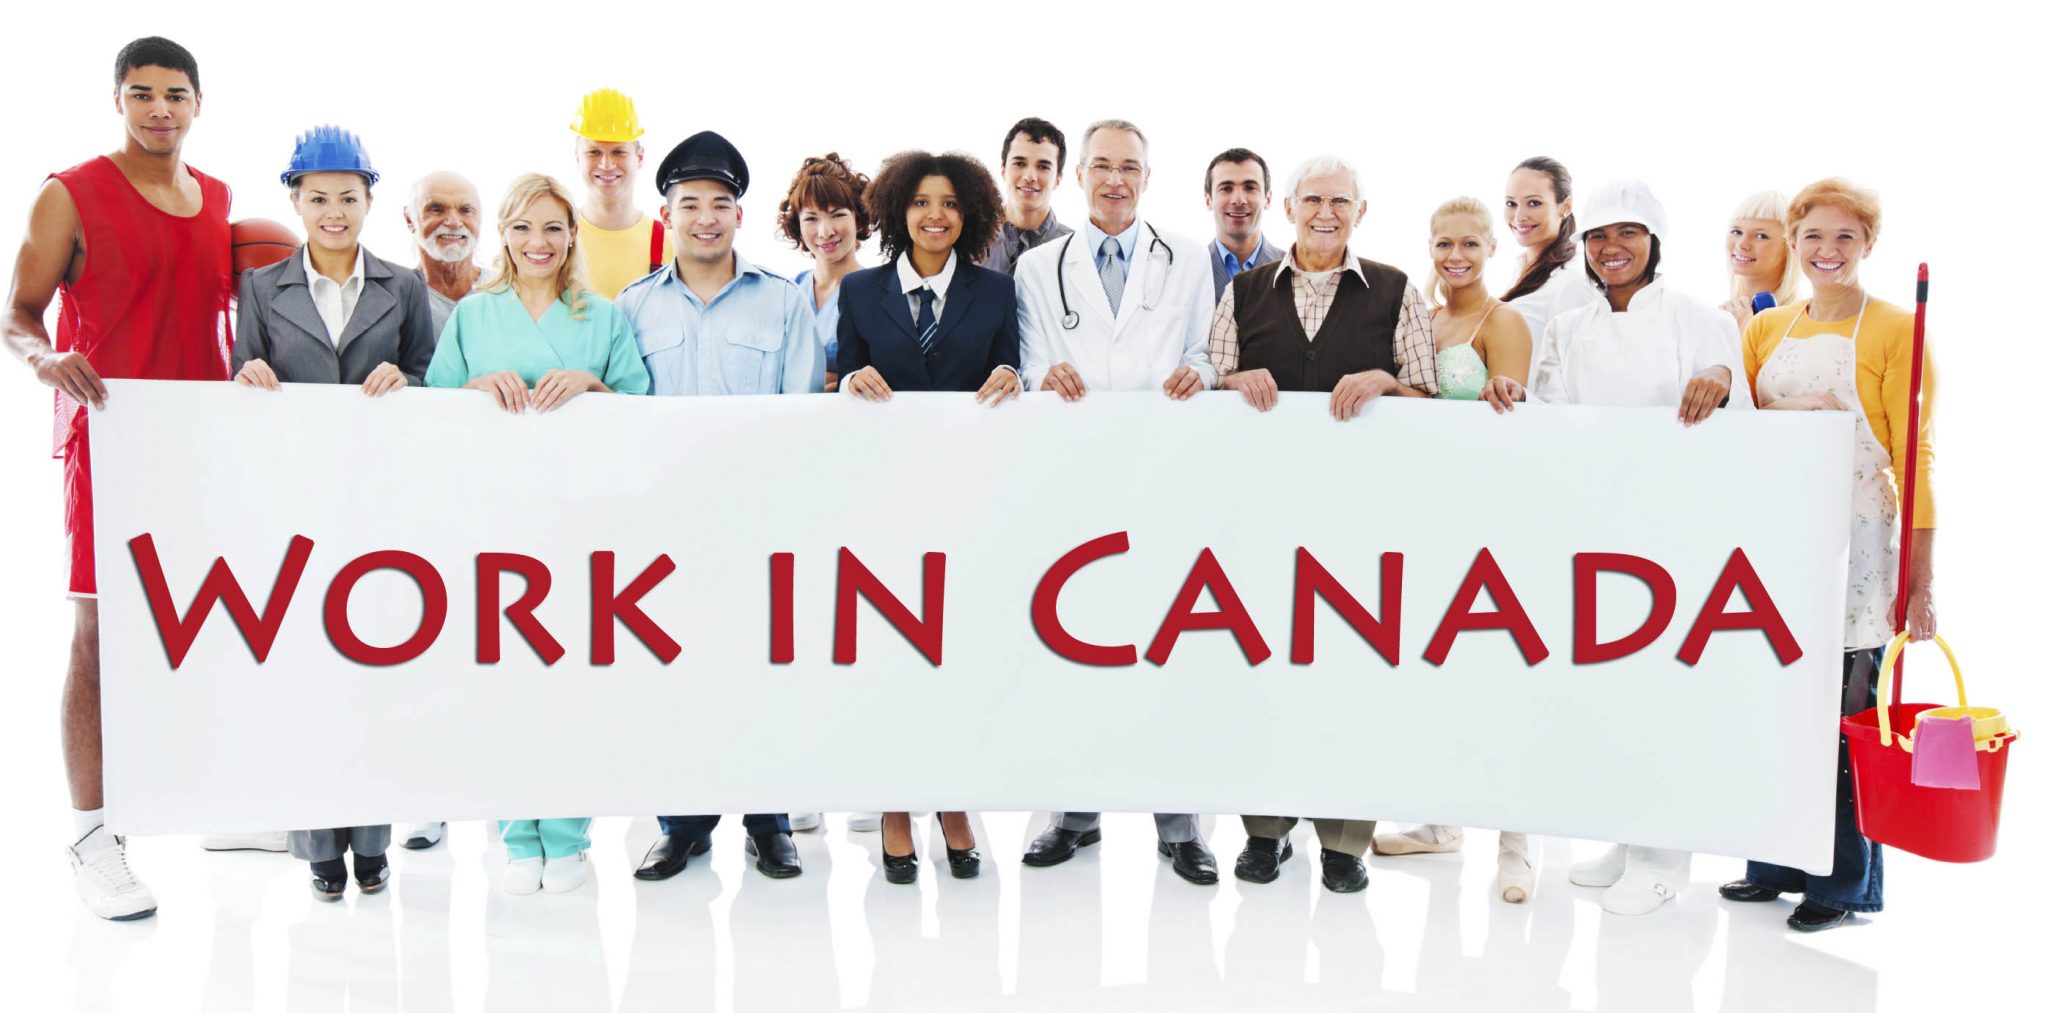 Why do so many skilled immigrants complain that they do not get jobs in Canada?